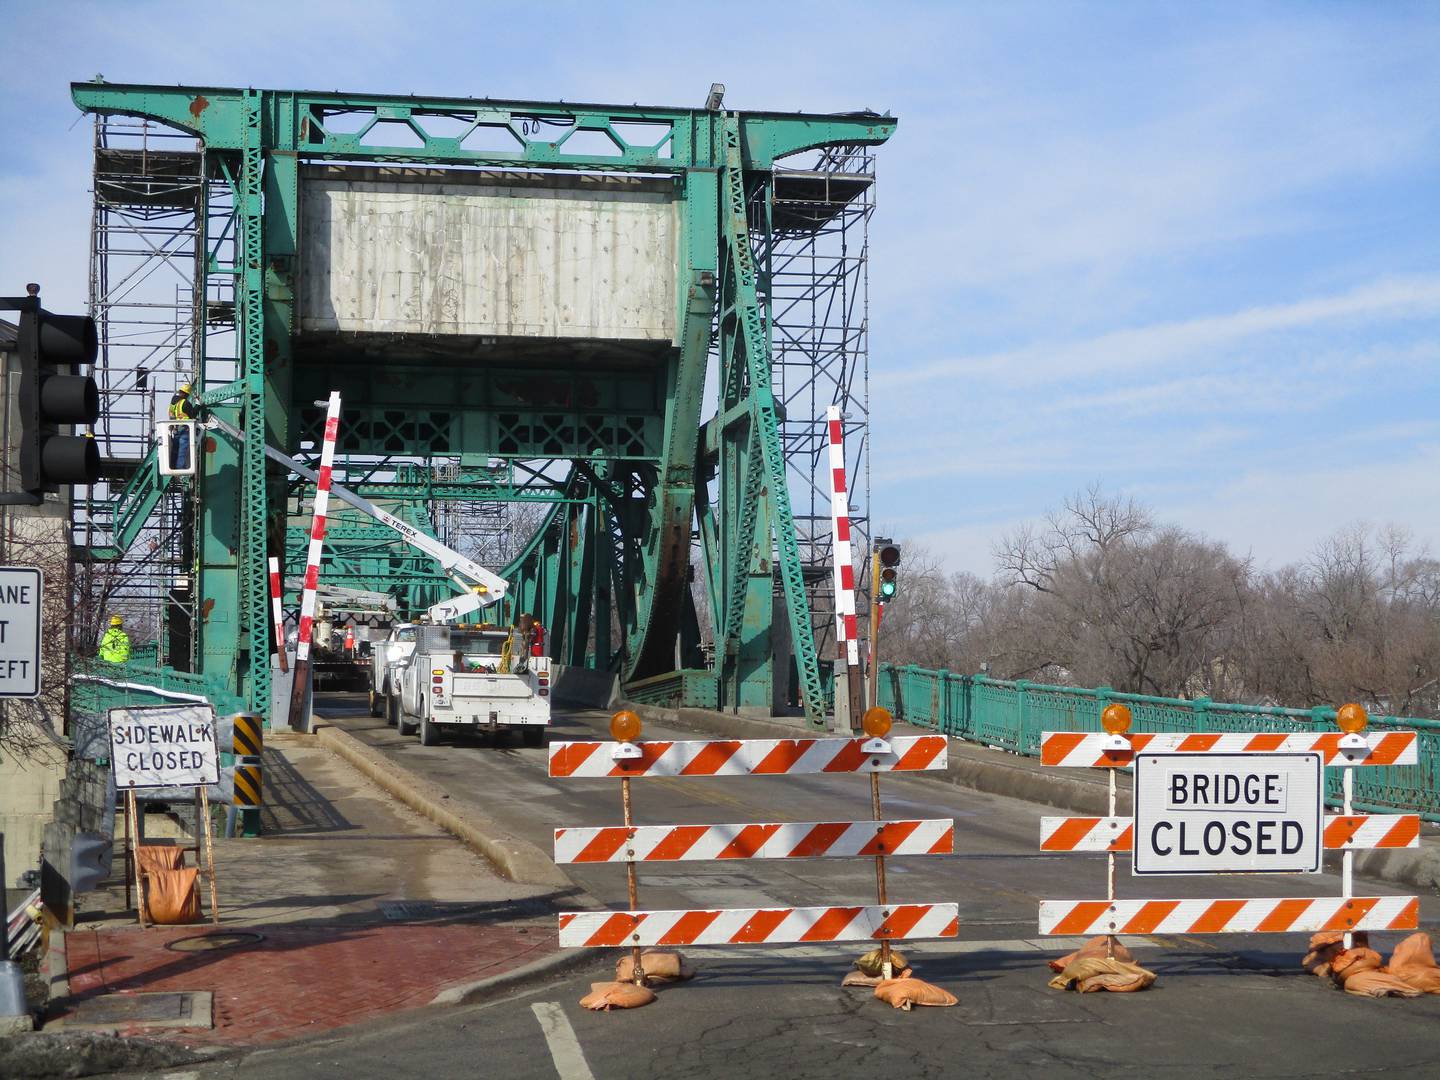 The Illinois Department of Transportation closed the Jackson Street bridge in downtown Joliet for technology upgrades on Monday, Feb. 21, 2022.